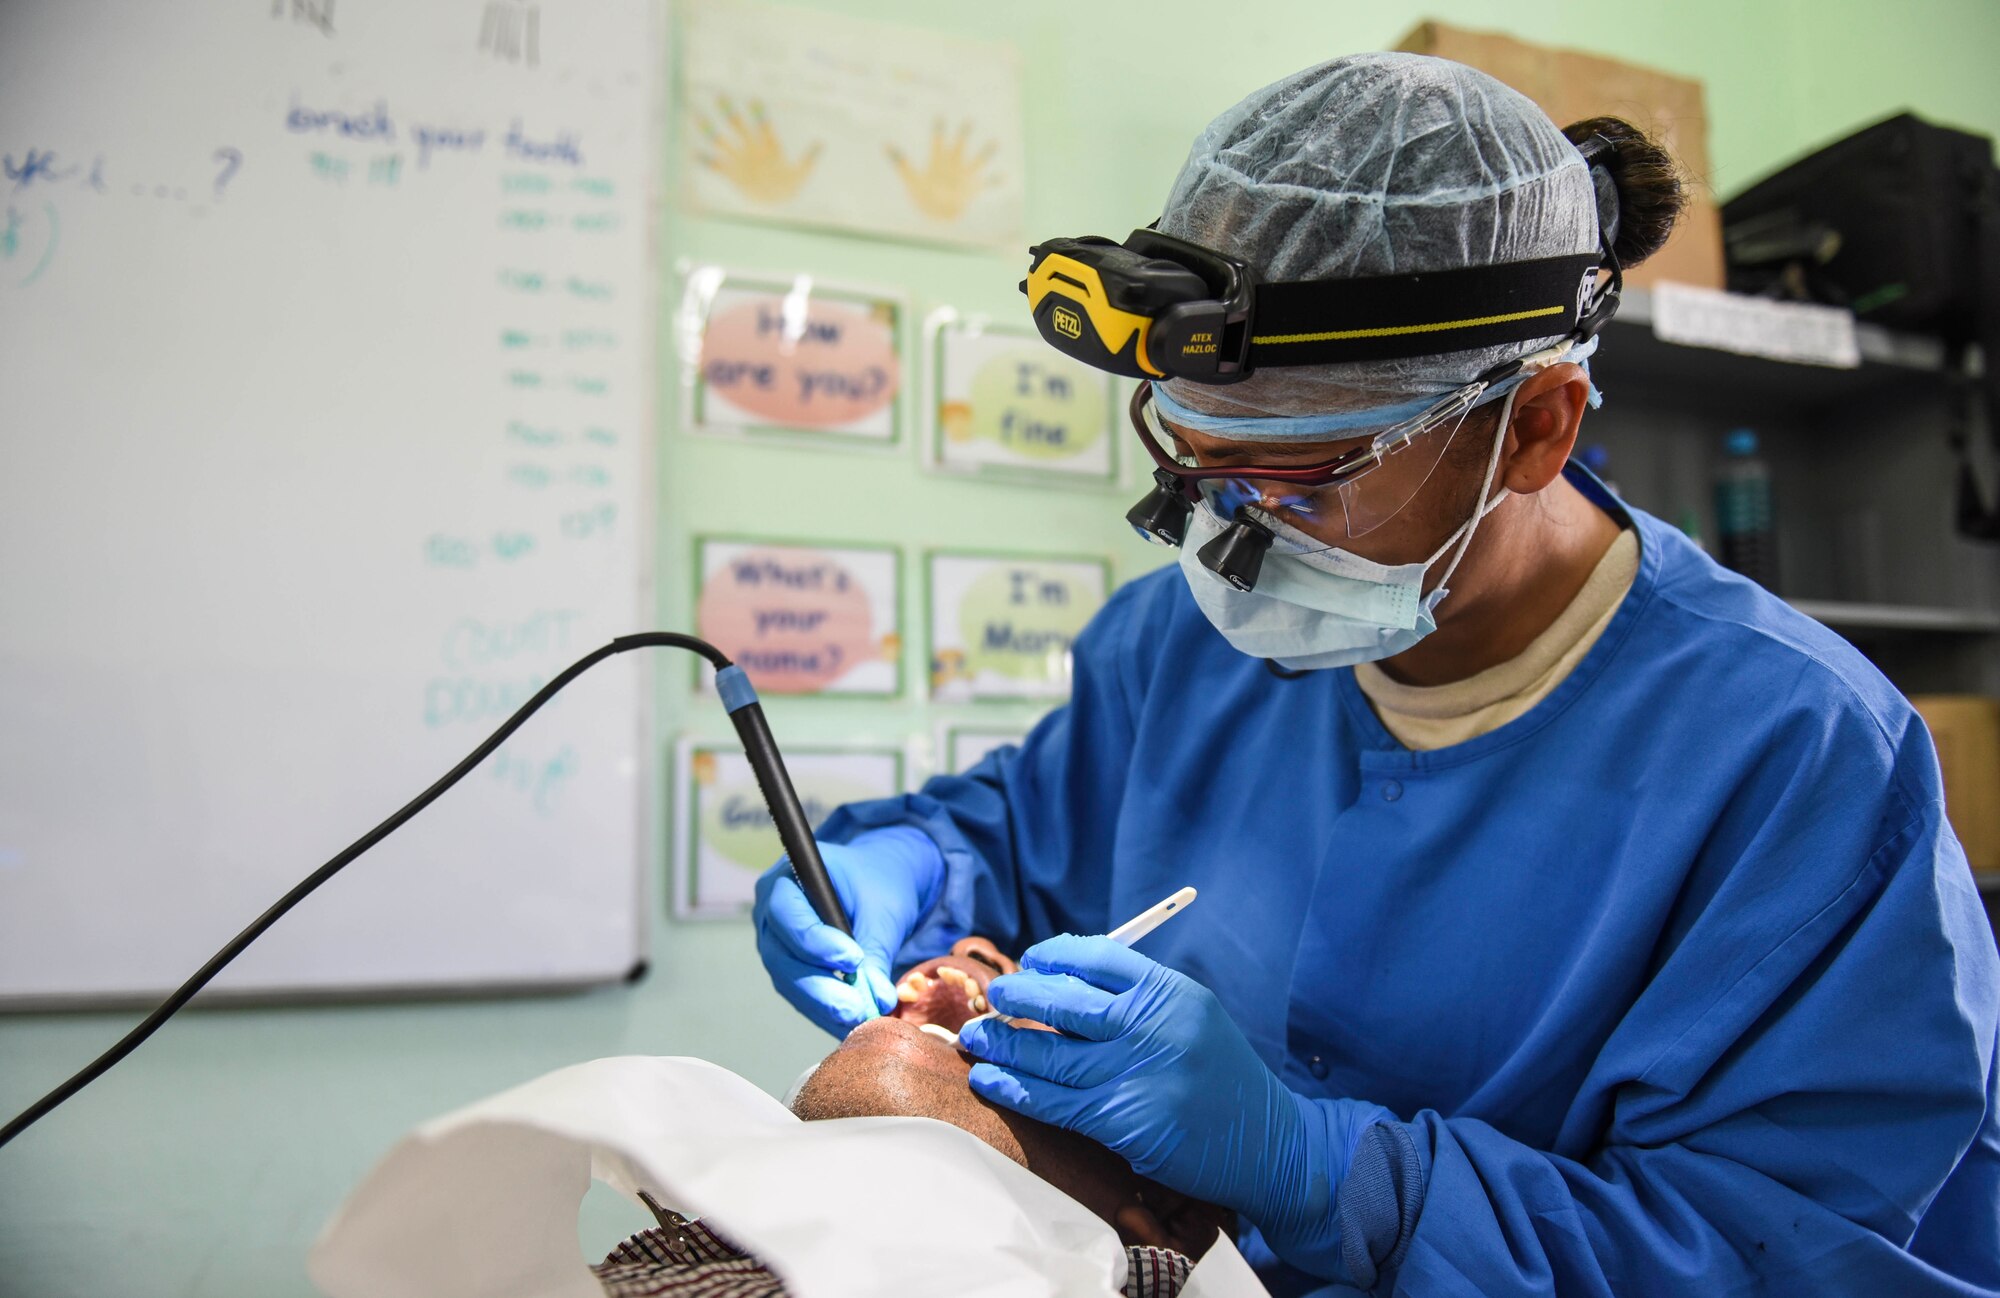 U.S. Air Force Master Sgt. Emeriles Curry, 346th Expeditionary Medical Operations Squadron dental hygienist, provides dental care to a local man, May 11, 2018 in the Coclé Province of Panama. So far, in 2-weeks’ worth of Medical Readiness Training Exercises the teams, working in conjunction with the Panamanian Ministry of Health, have seen nearly 4,700 patients and 502 animals. The medical team is participating in Exercise New Horizons 2018, which is a joint training exercise focused on civil engineer, medical, and support service personnel’s ability to prepare, deploy, operate, and redeploy outside the United States. (U.S. Air Force photo by Senior Airman Dustin Mullen)